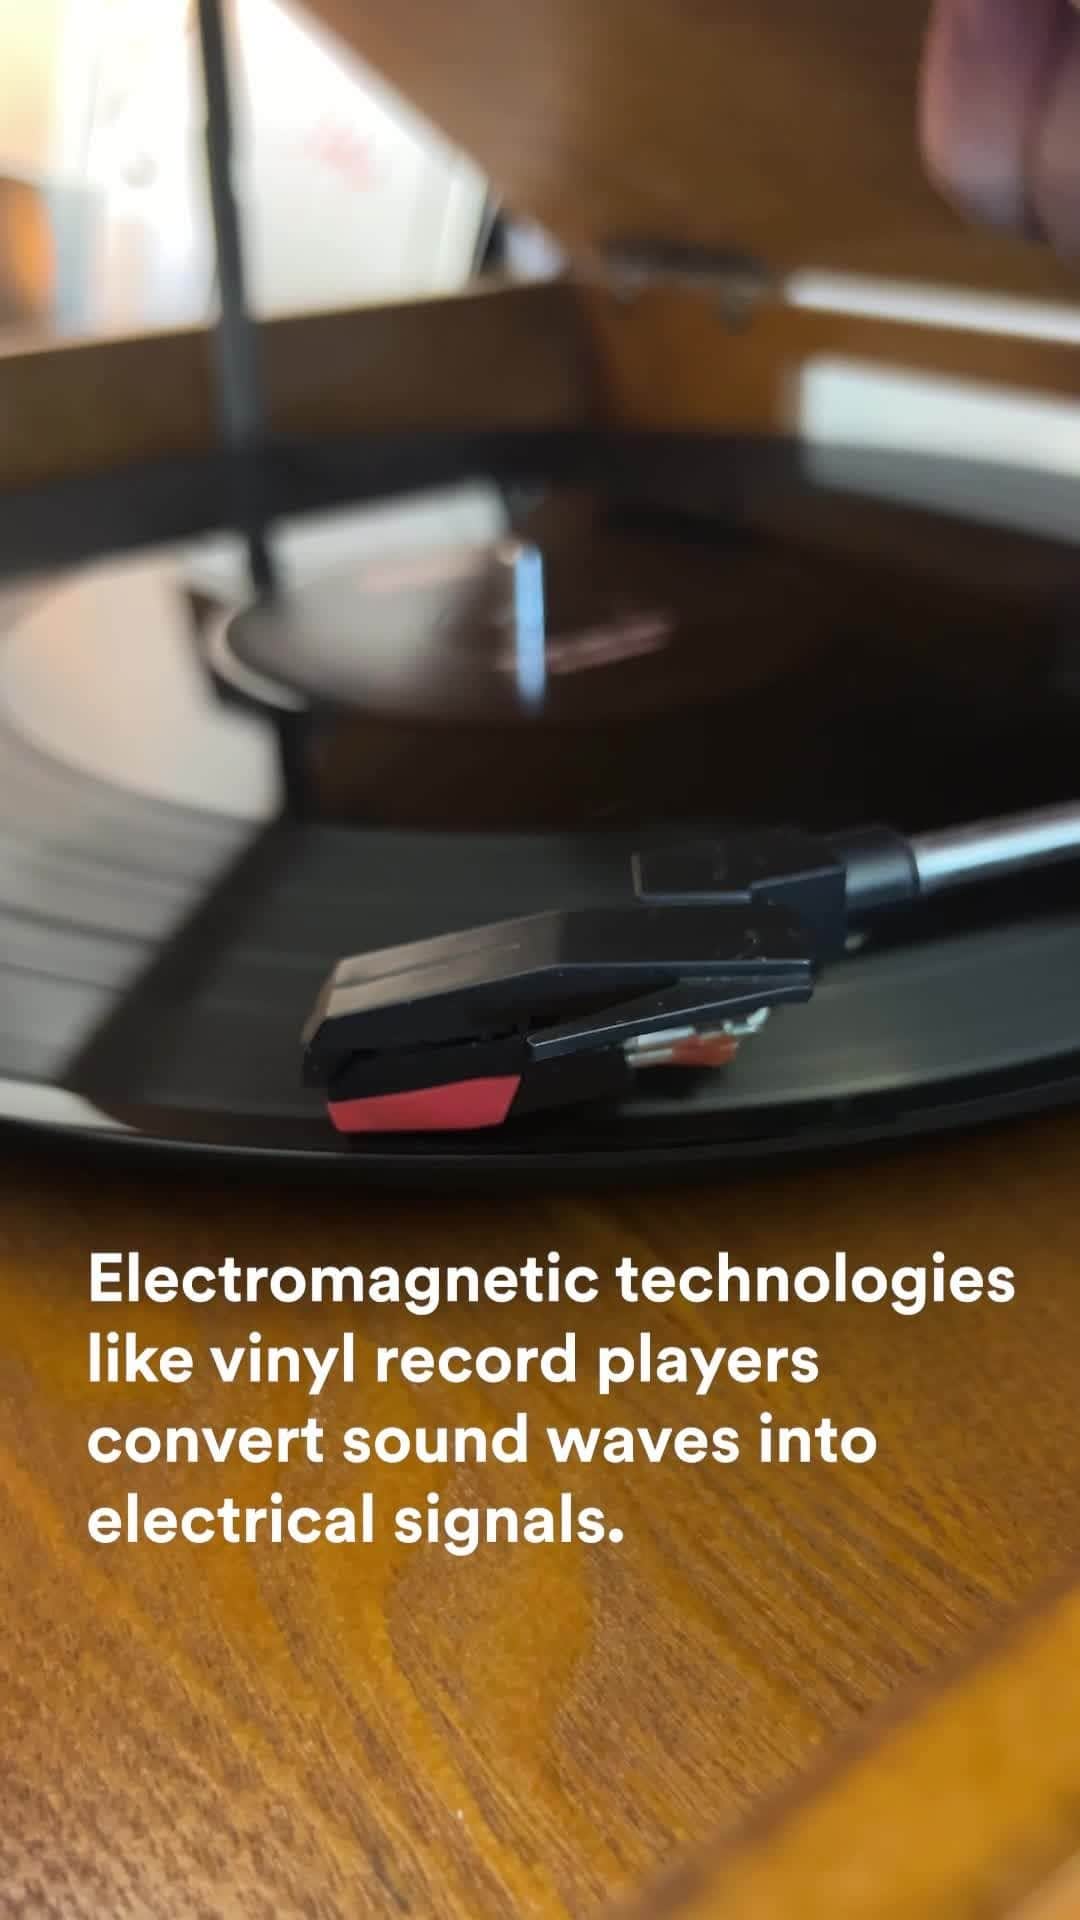 3M（スリーエム）のインスタグラム：「Do you know how vinyl records work? 🎶   Fun fact: If the grooves of a record were unraveled, they would reach a length of 500 meters (1,640 feet)!  #science #electromagnetic #vinyl #record」